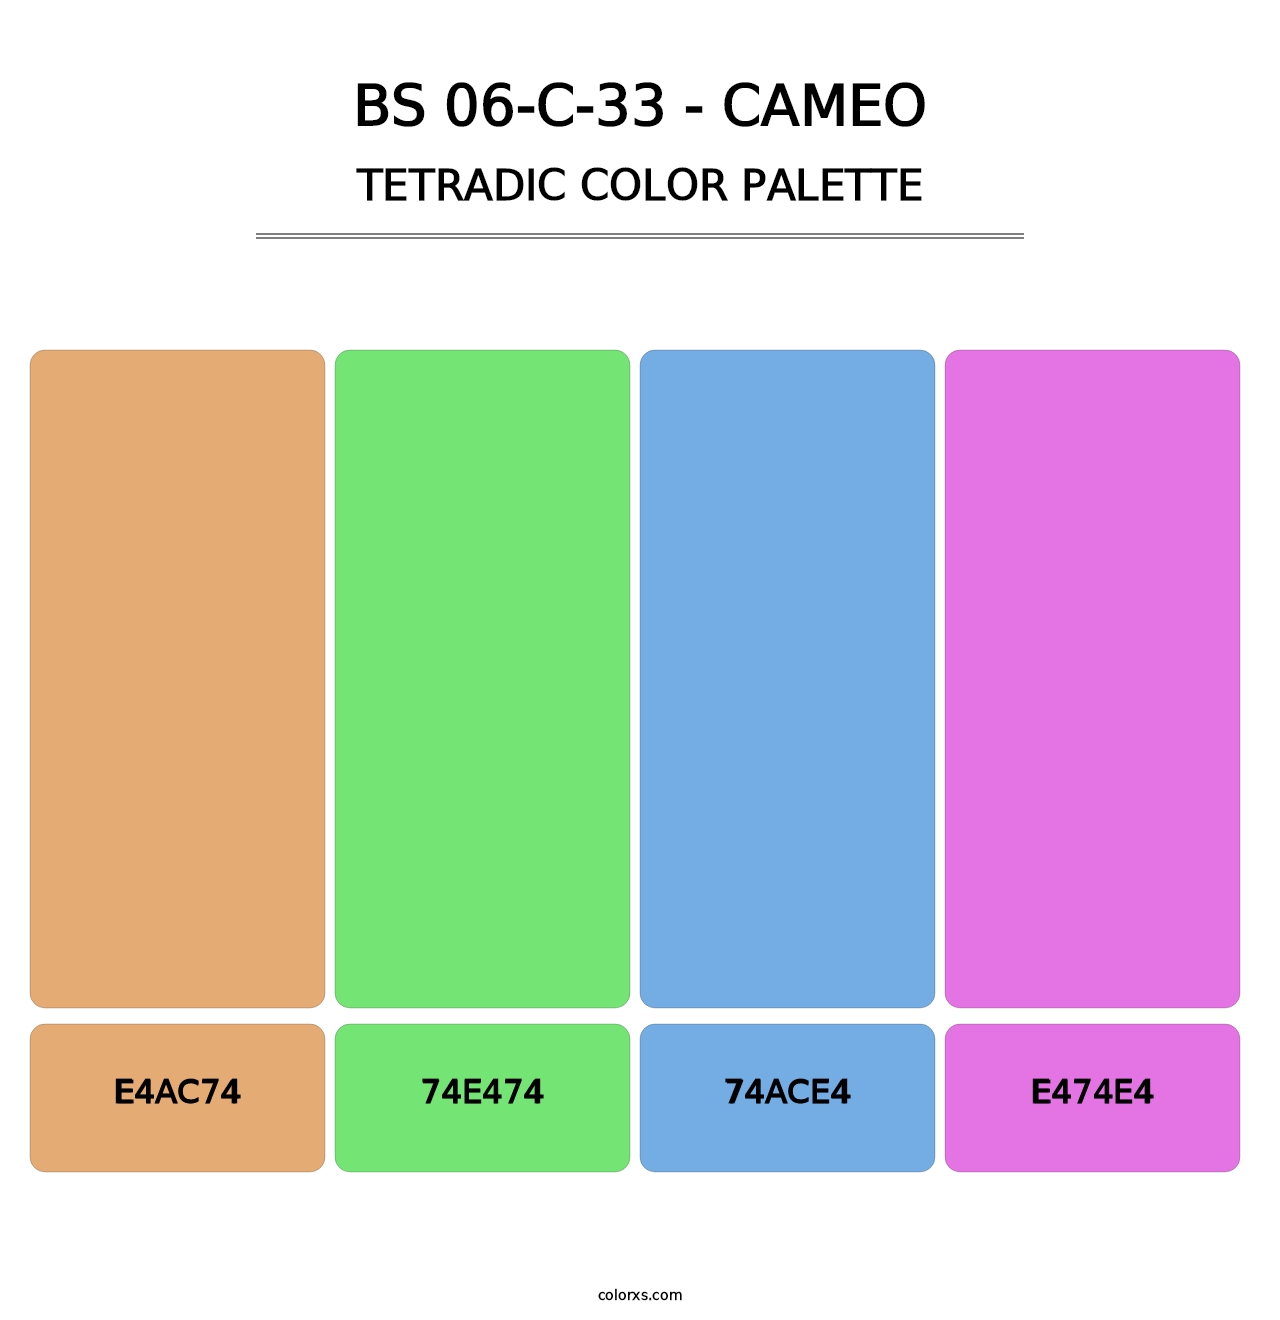 BS 06-C-33 - Cameo - Tetradic Color Palette